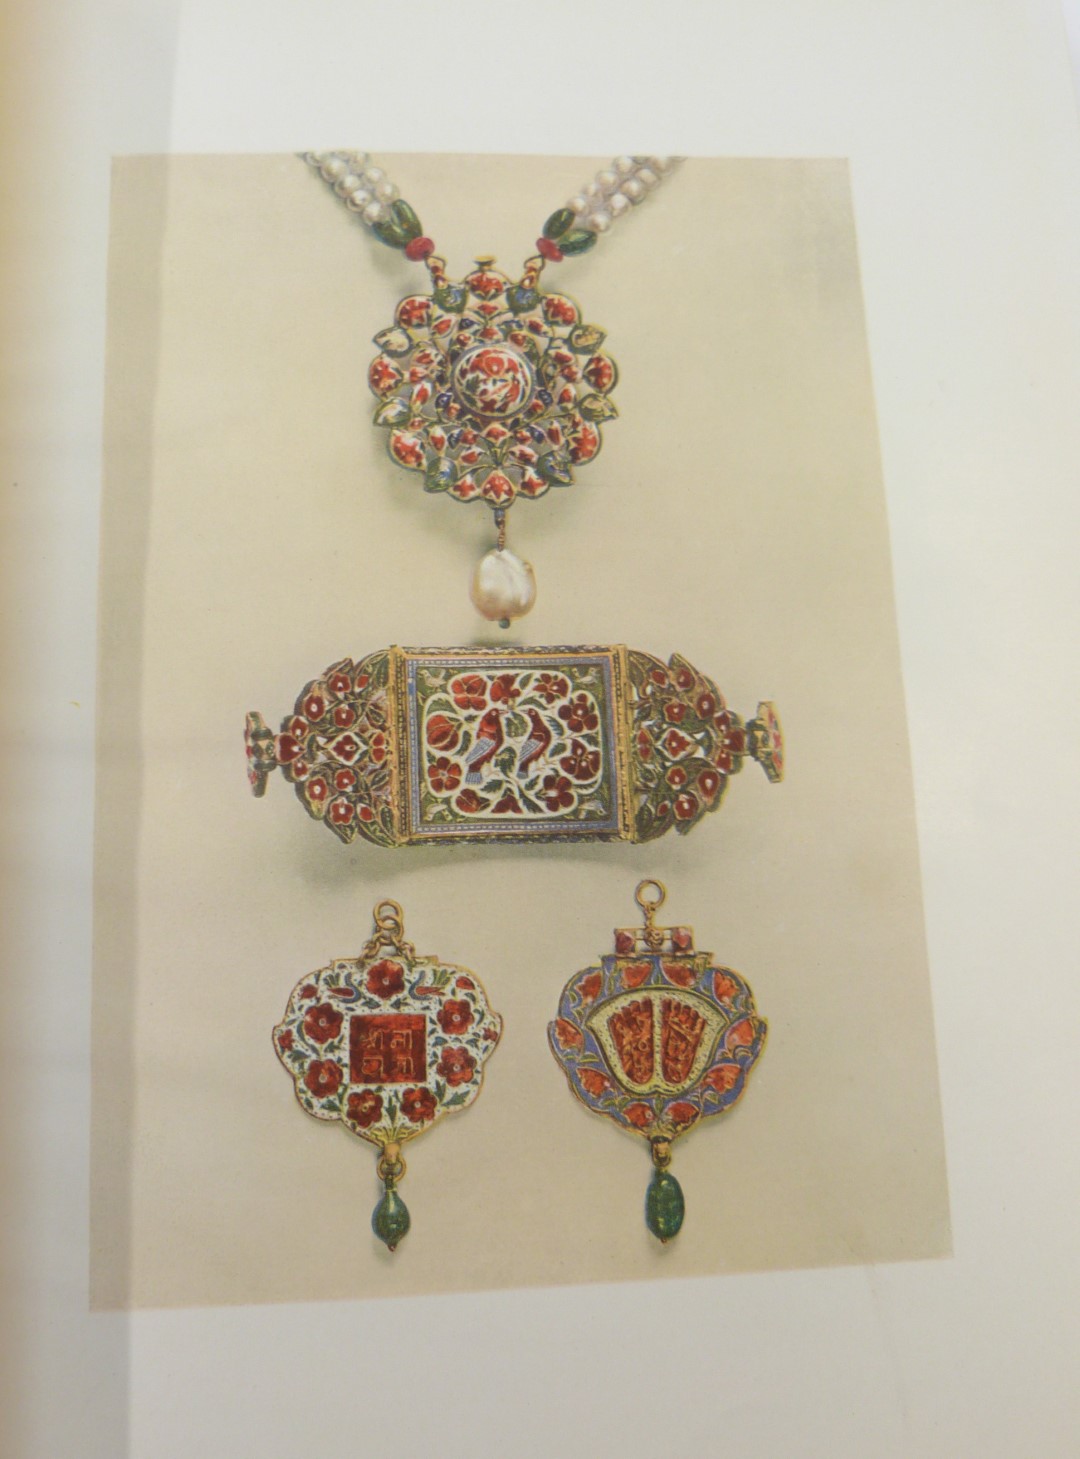 [Mappin & Webb] The Romance of The Jewel by Francis Stopford printed for Private Circulation 1920 - Image 3 of 7